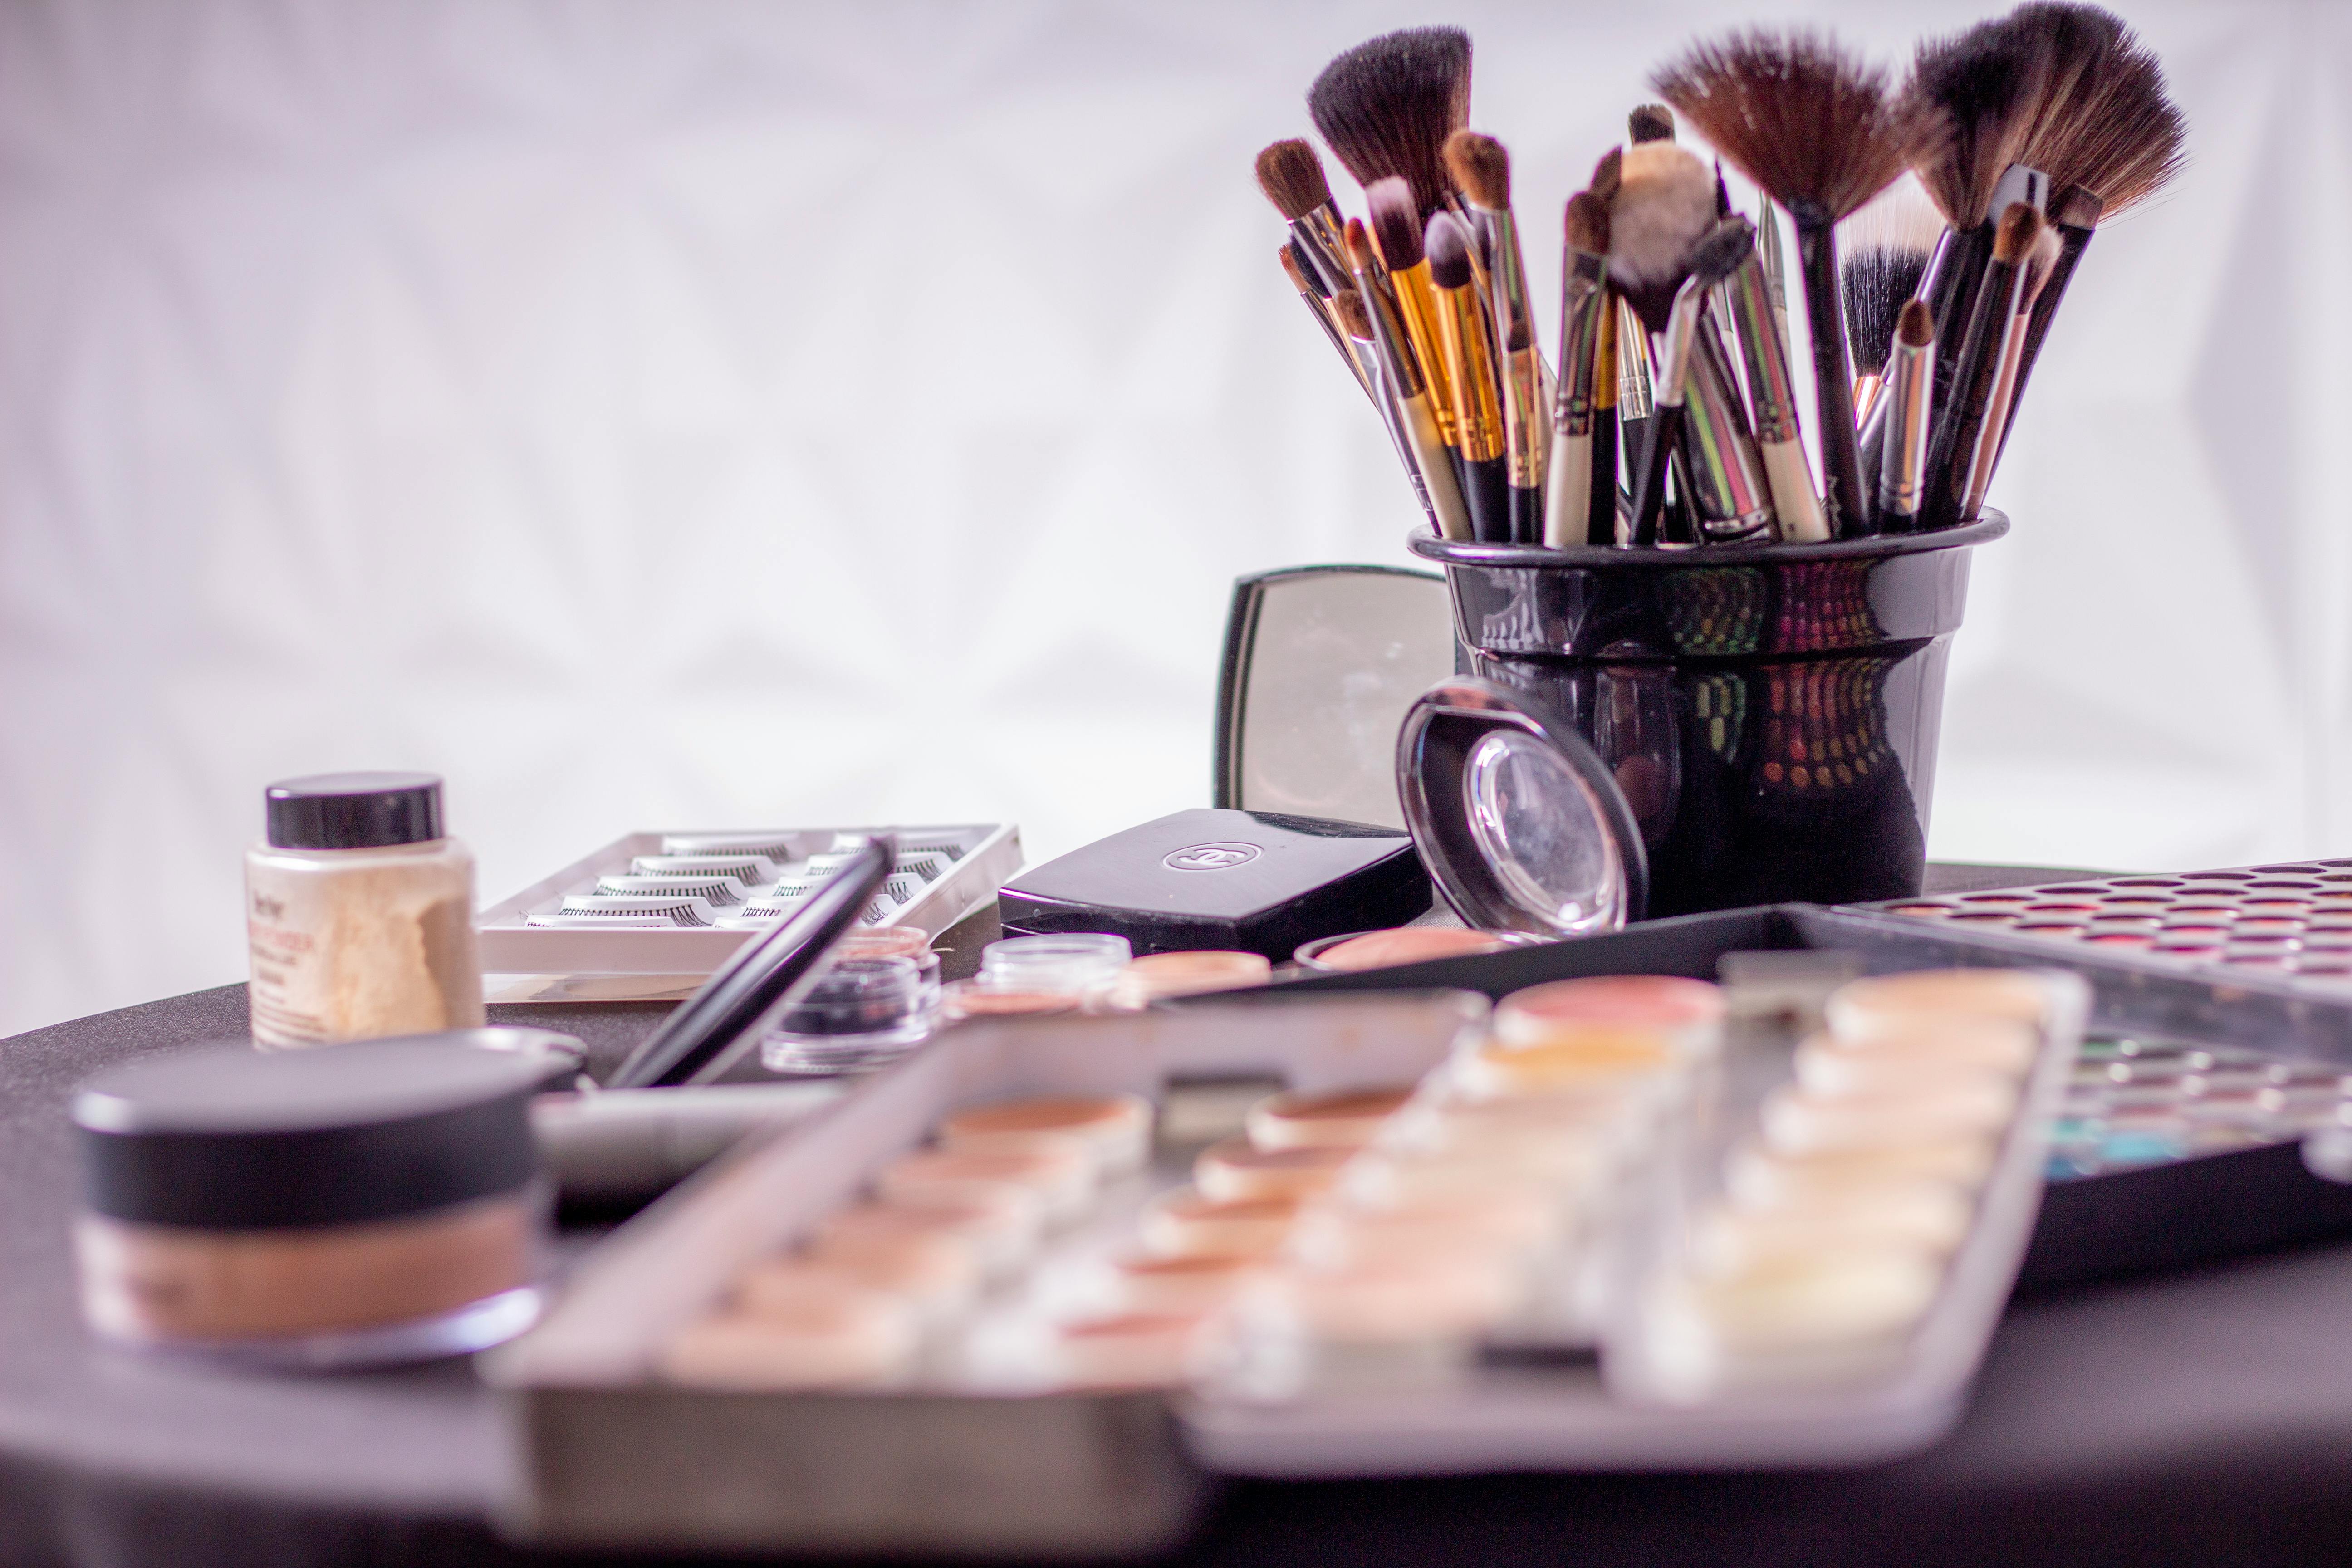 For illustration purposes only. A variety of makeup and brushes | Source: Pexels